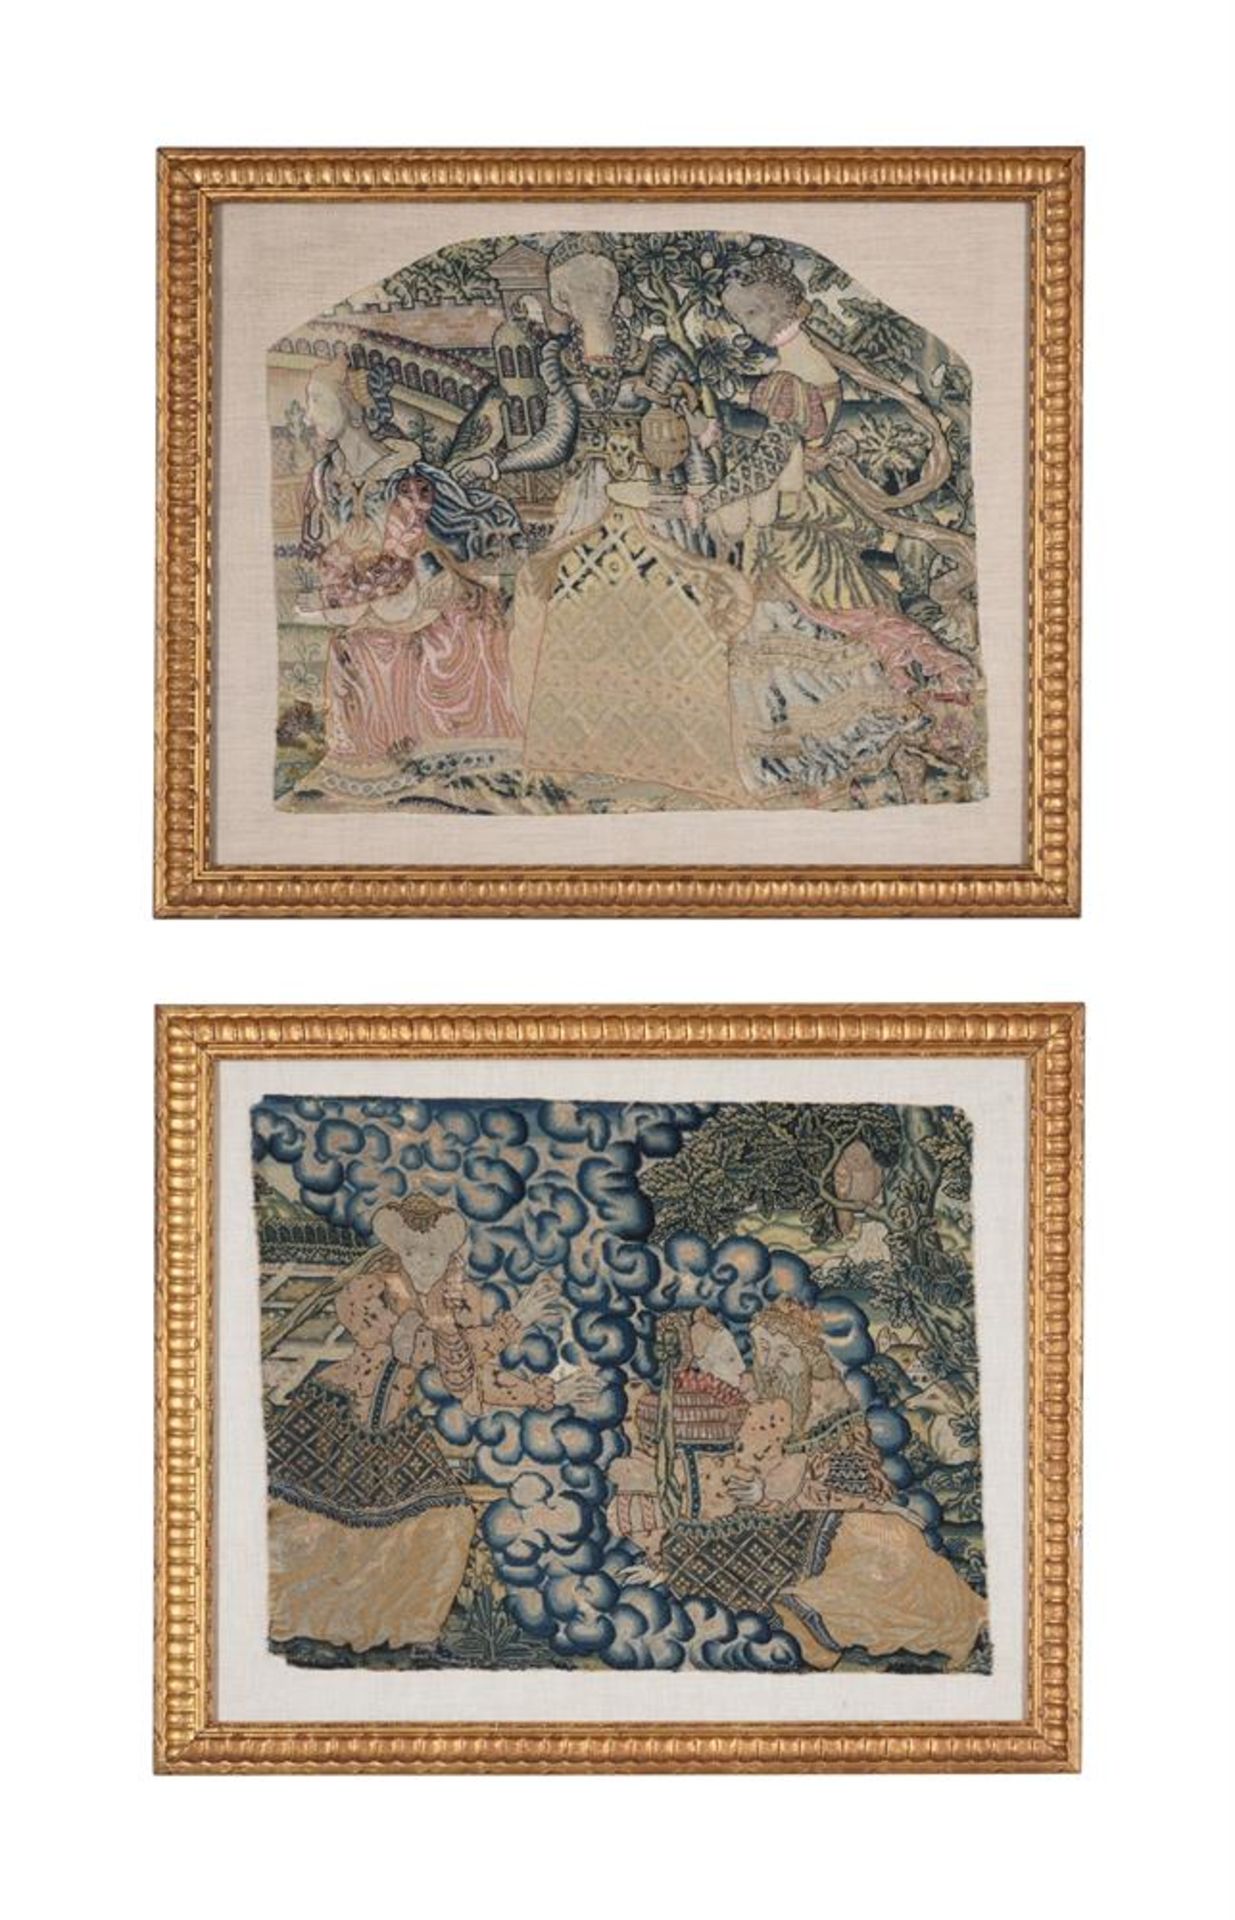 TWO FRAMED COURTLY SCENE NEEDLEWORKS, LATE 16TH/EARLY 17TH CENTURY